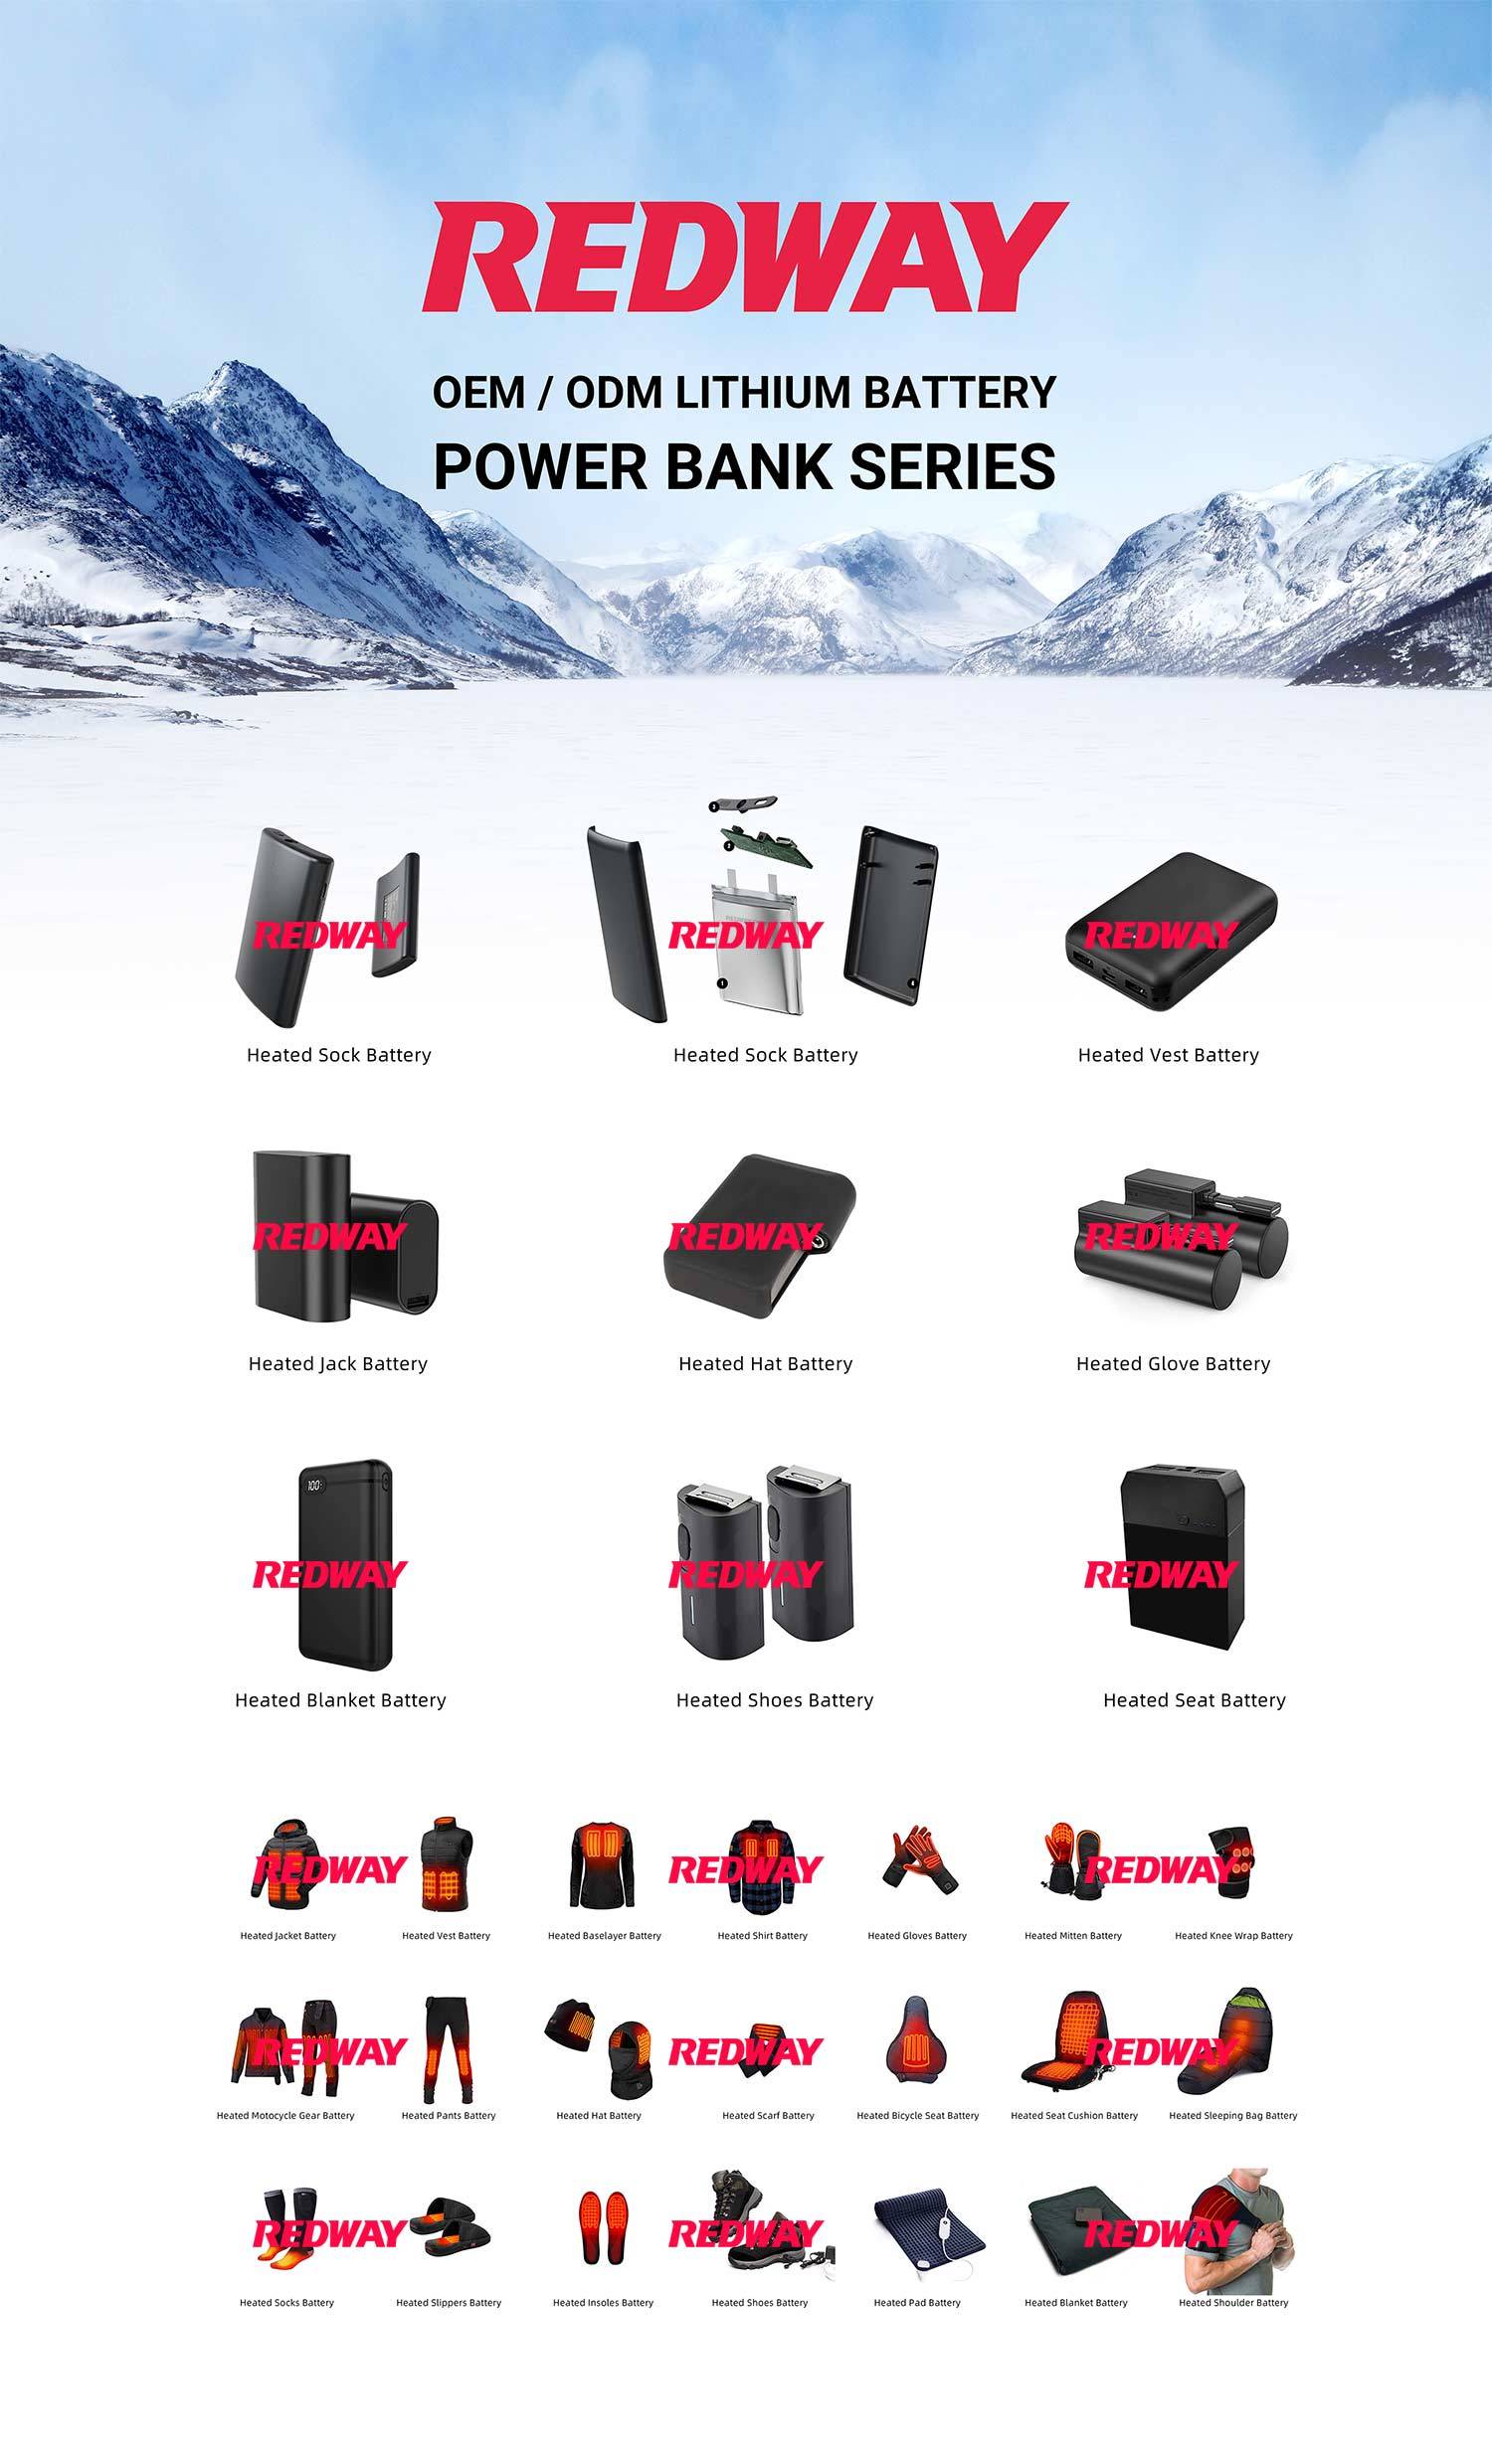 redway-battery-power-bank-heated-clothing-battery